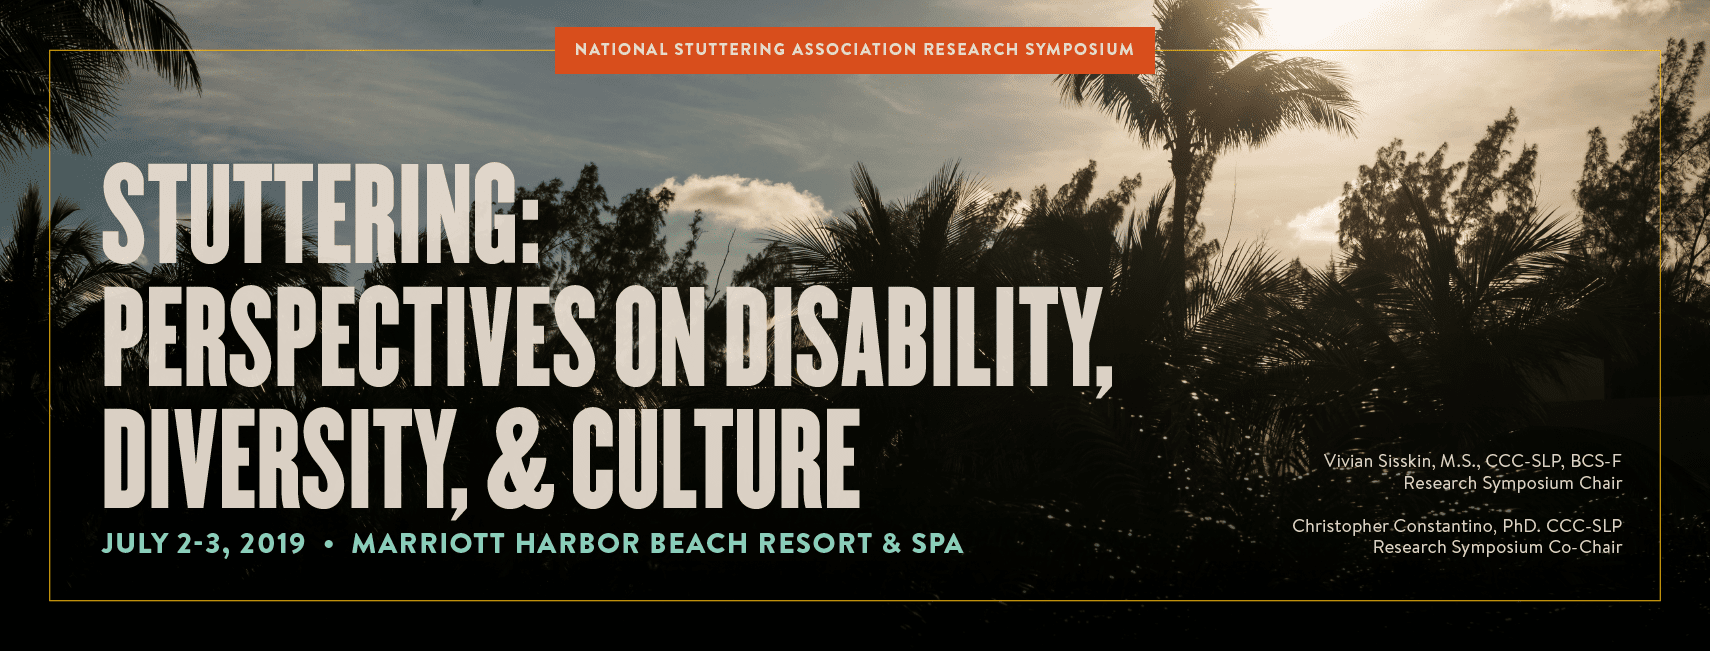 Event banner for the national stuttering association research symposium titled "stuttering: perspectives on disability, diversity, & culture," held on july 2-3, 2019 at the marriott harbor beach resort & spa, featuring palm trees at sunset.